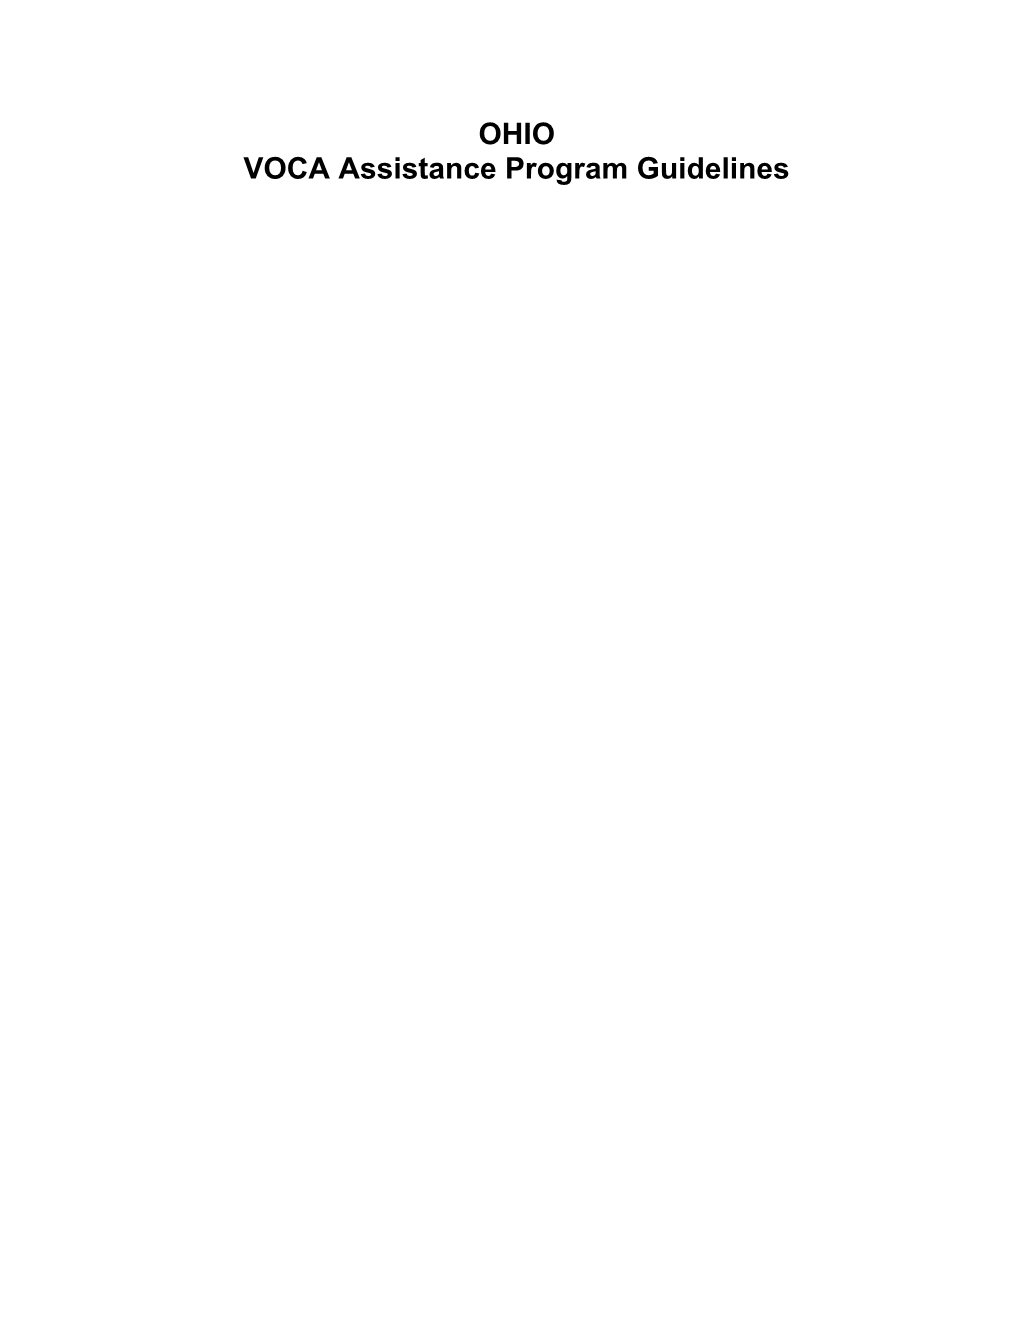 VOCA Assistance Program Guidelines TABLE of CONTENTS